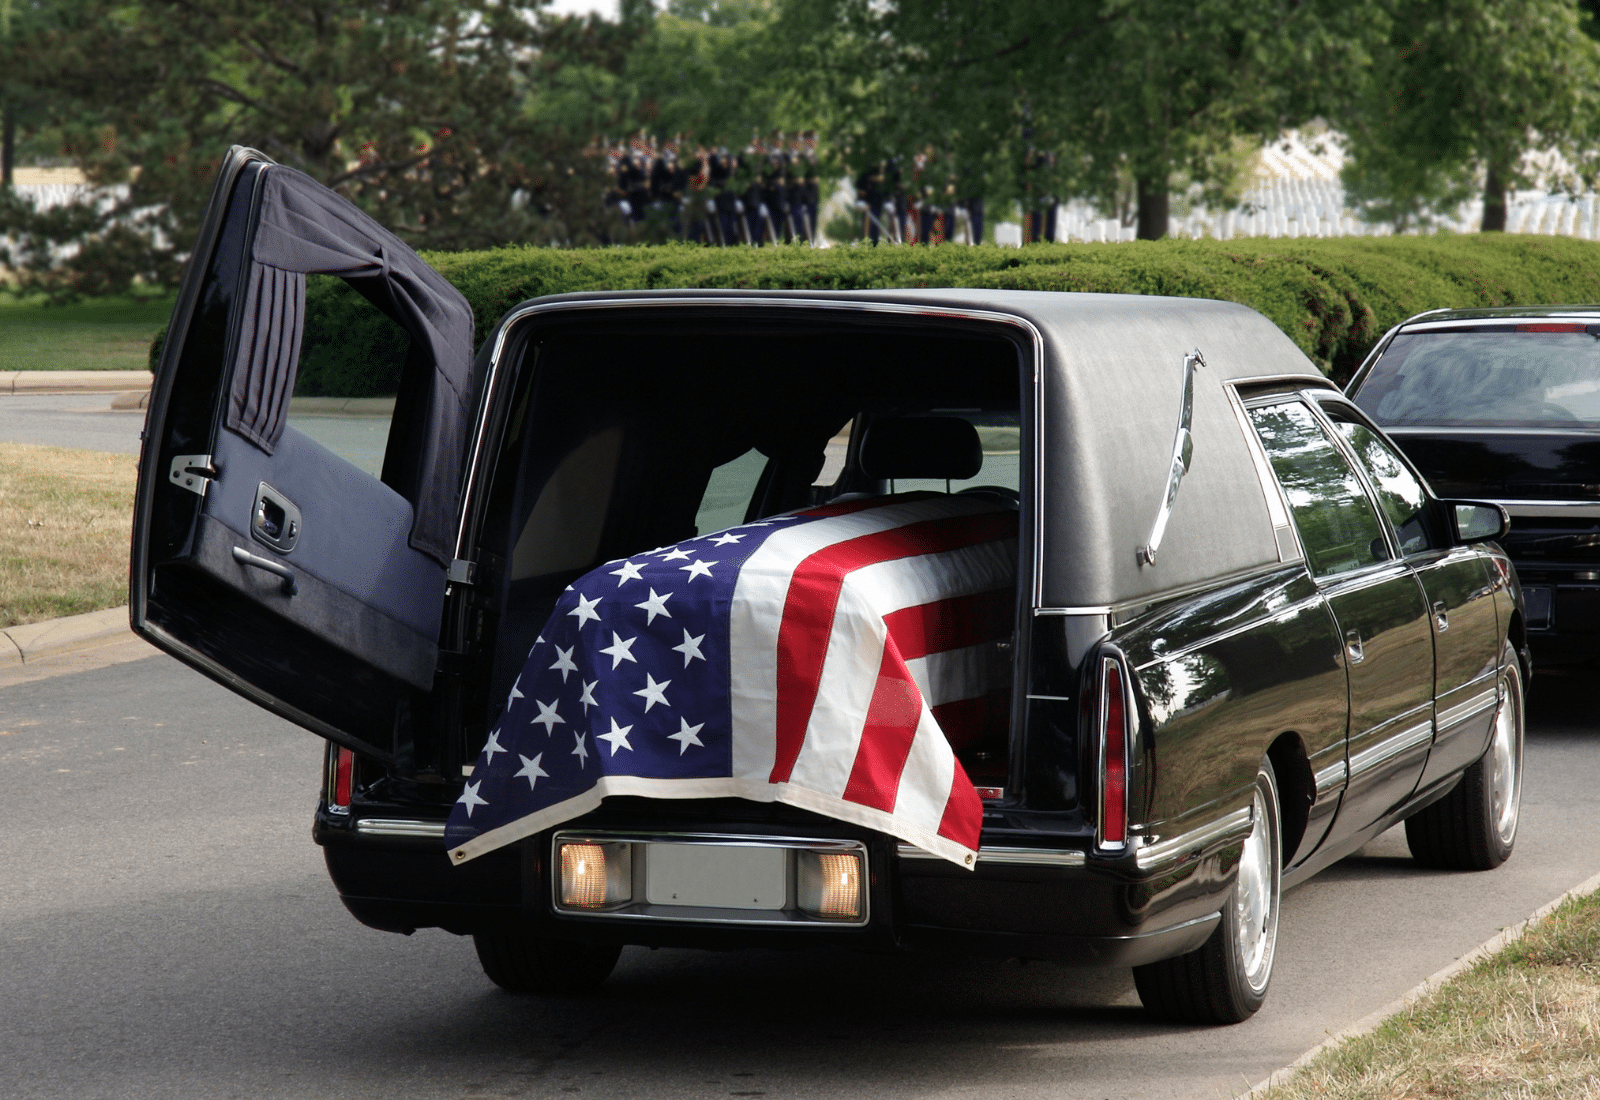 Image of a hearse carrying a casket decorated with the American flag